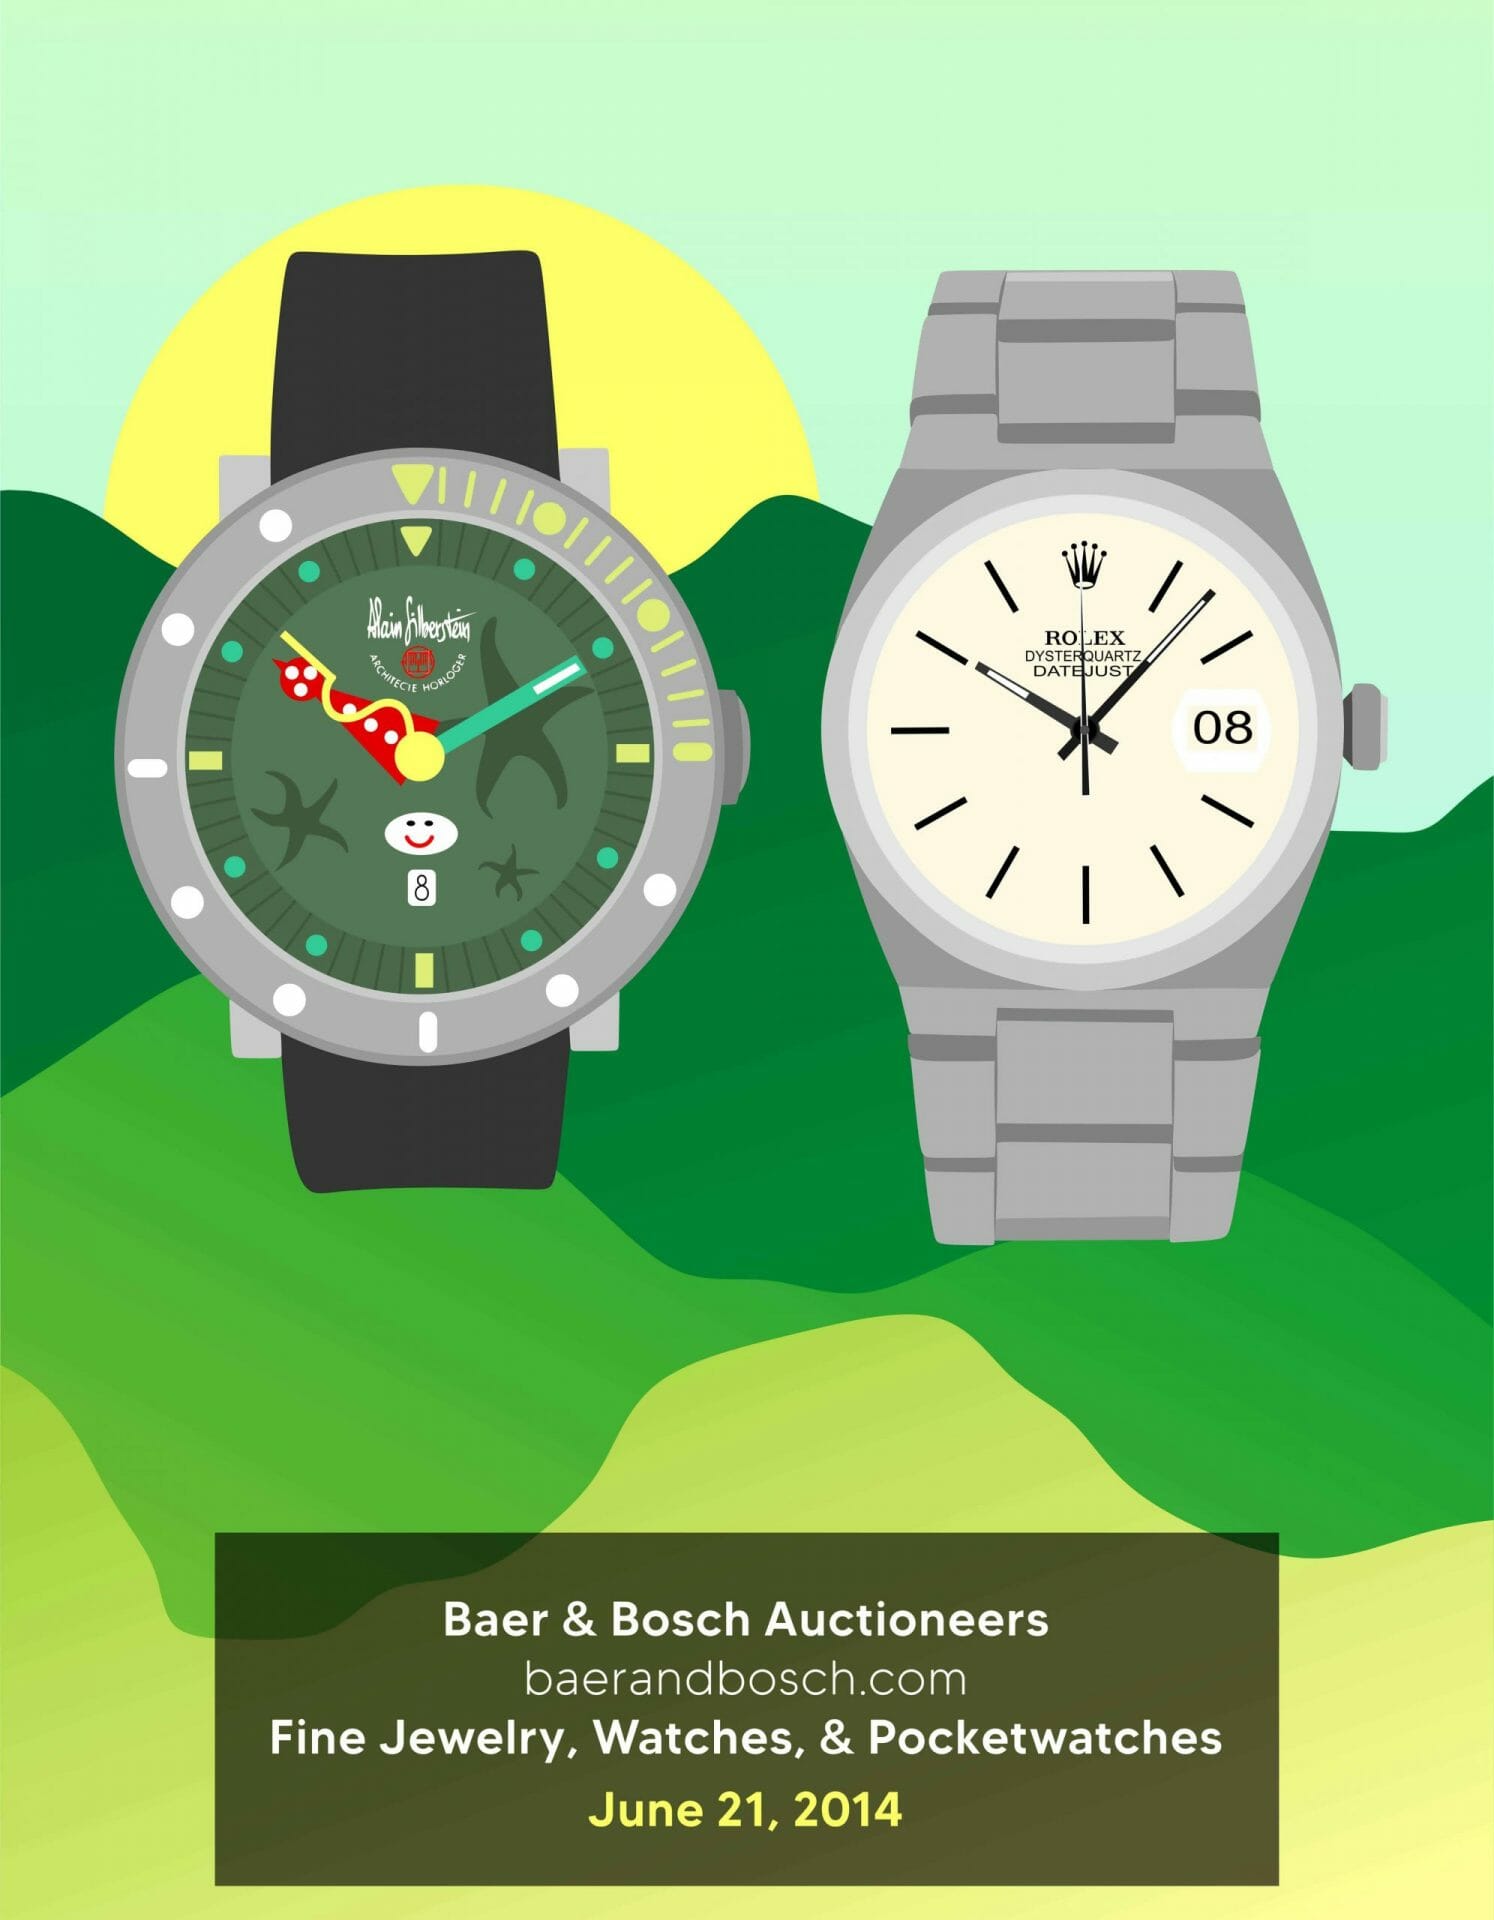 Fine Jewelry, Watches, & Pocketwatches 06.21.14 Baer & Bosch Auctioneers